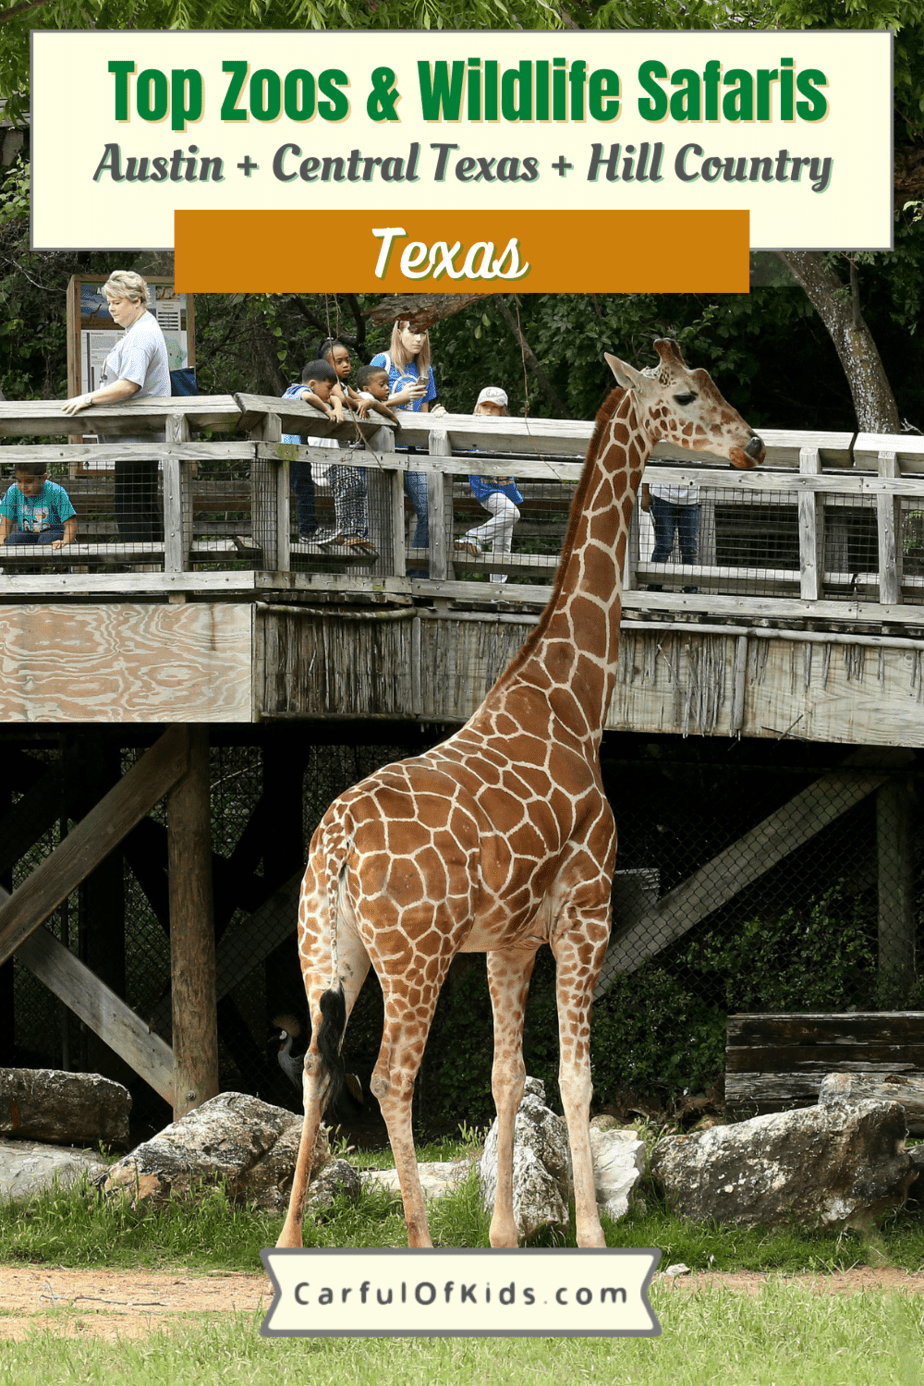 Load up and head out for a day dedicated to seeing and learning about animals in Central Texas. With traditional zoos, rescue zoos and wildlife safaris, visitors have more choices than ever. See animals native to Texas along with exotic animals. there is a lot to see across the Austin area and beyond. Best Zoos in Central Texas | Wildlife Safaris near Austin | Where to see animals in Texas | Family Day Trips outside of Texas #Zoos #Austin